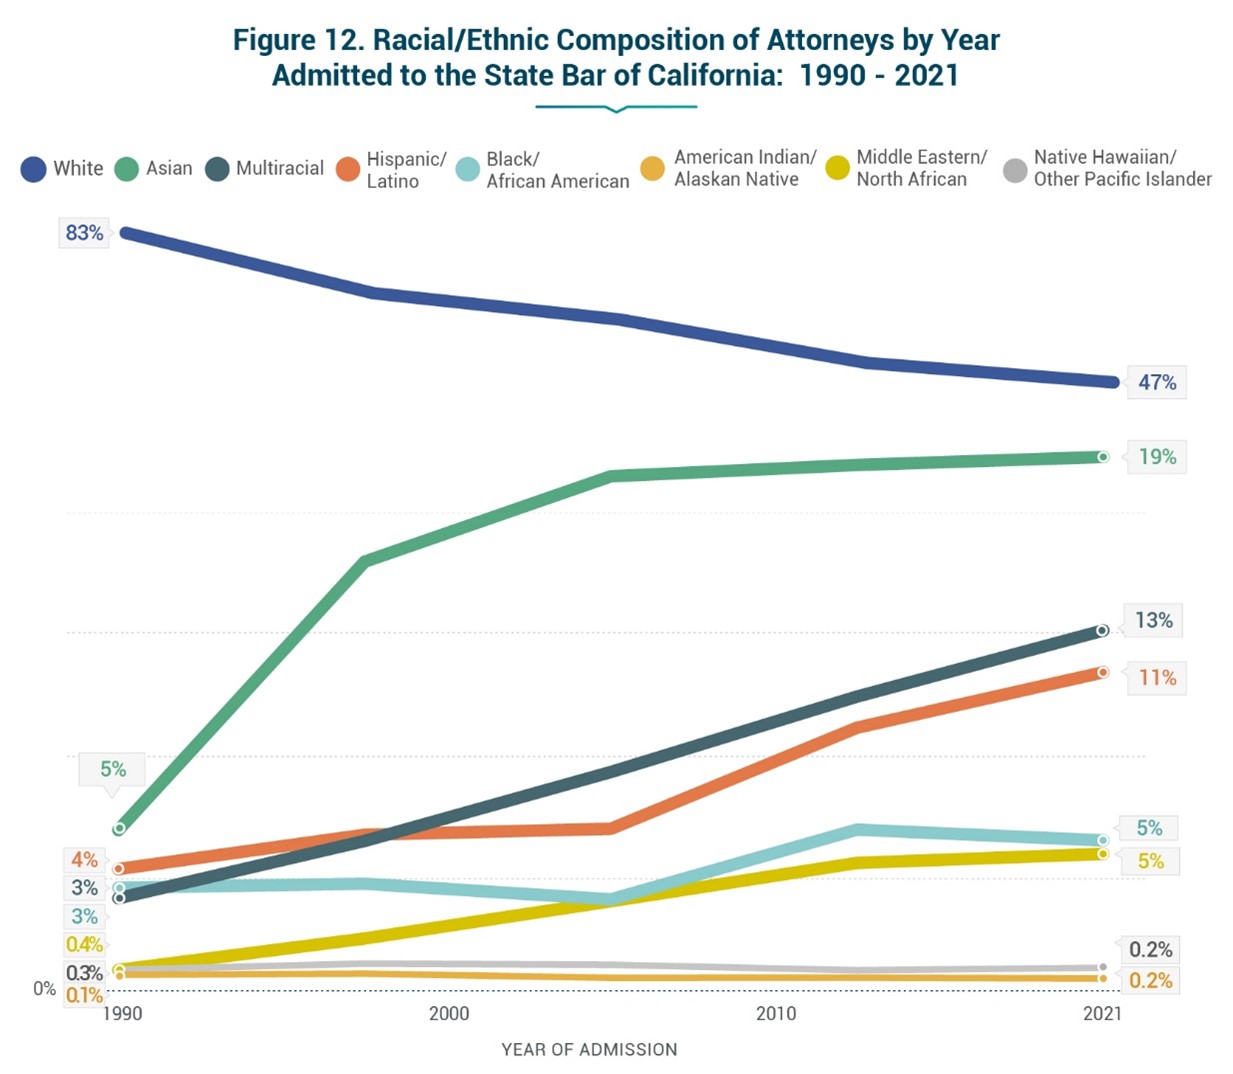 Graph chart shows racial/ethnic composition of attorneys admitted to the State Bar of California by year, 1990-2021